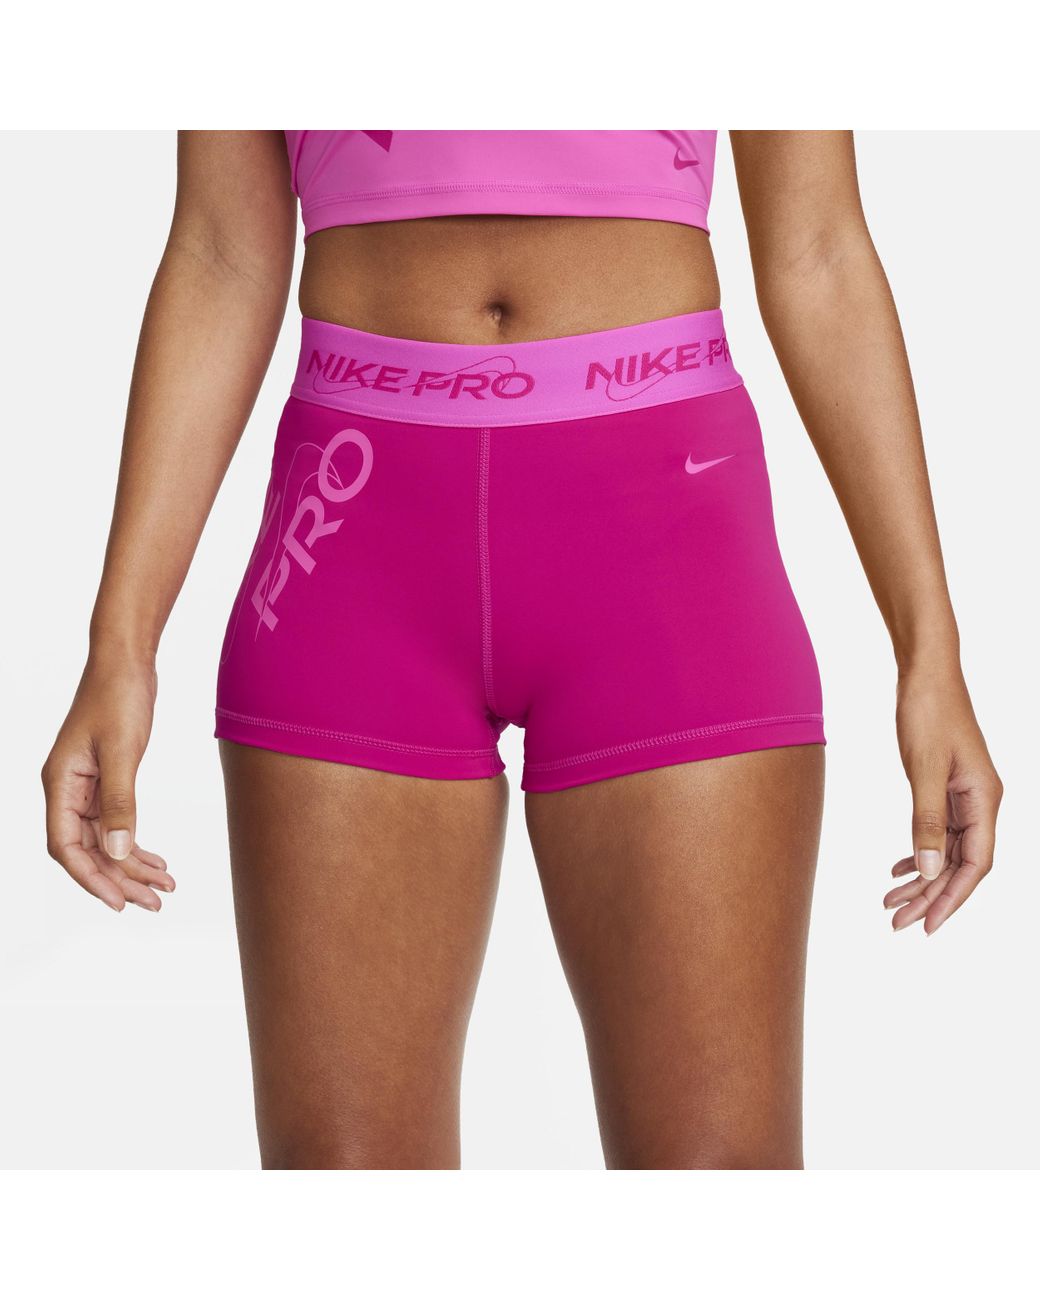 Nike Pro Mid-rise 3" Graphic Shorts in Pink | Lyst